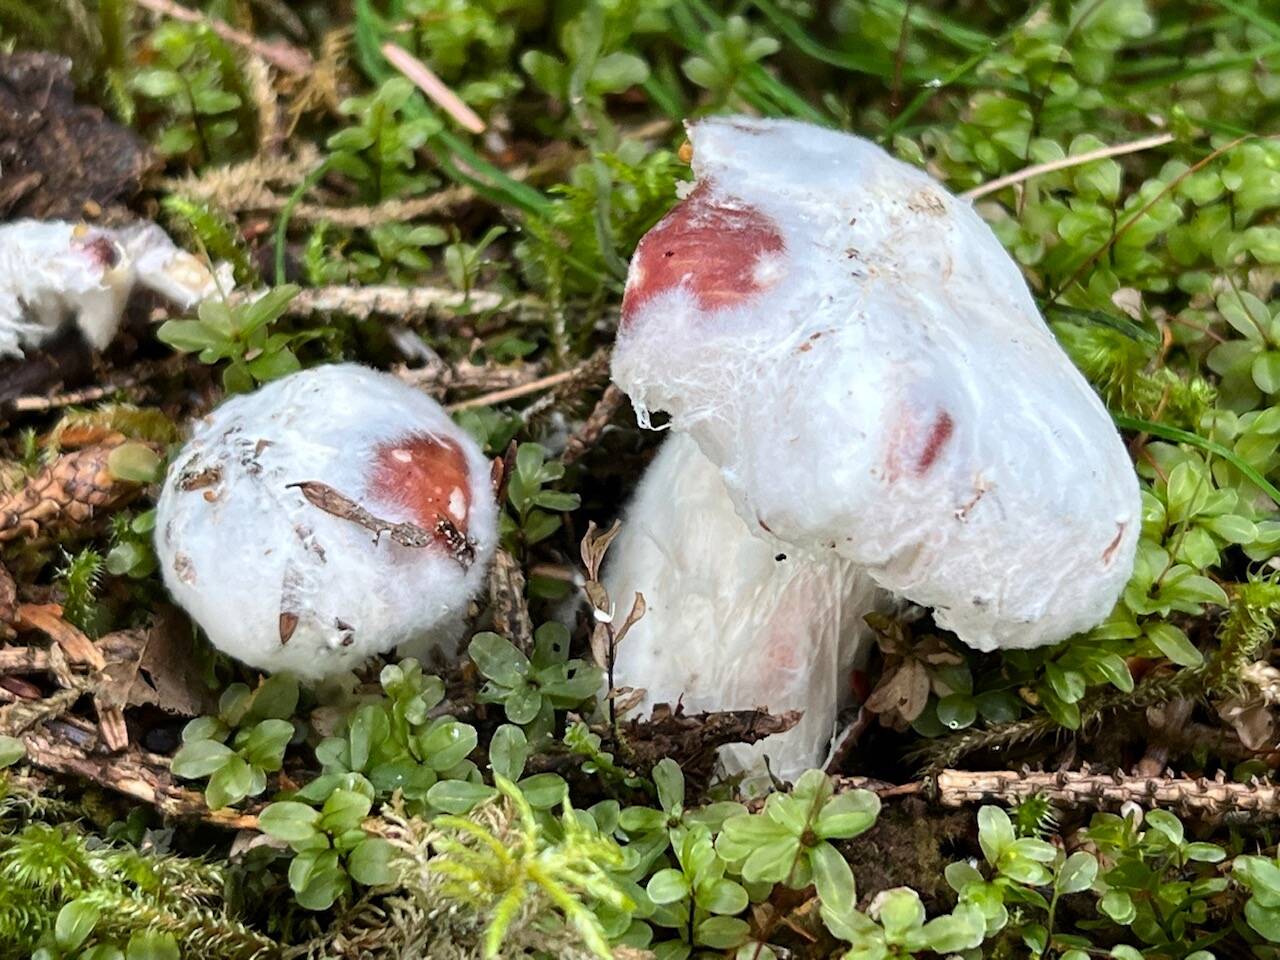 A parasitic fungus in the genus Hypomyces covers the top of another fungus, possibly a Russula. (Courtesy Photo / Deana Barajas)